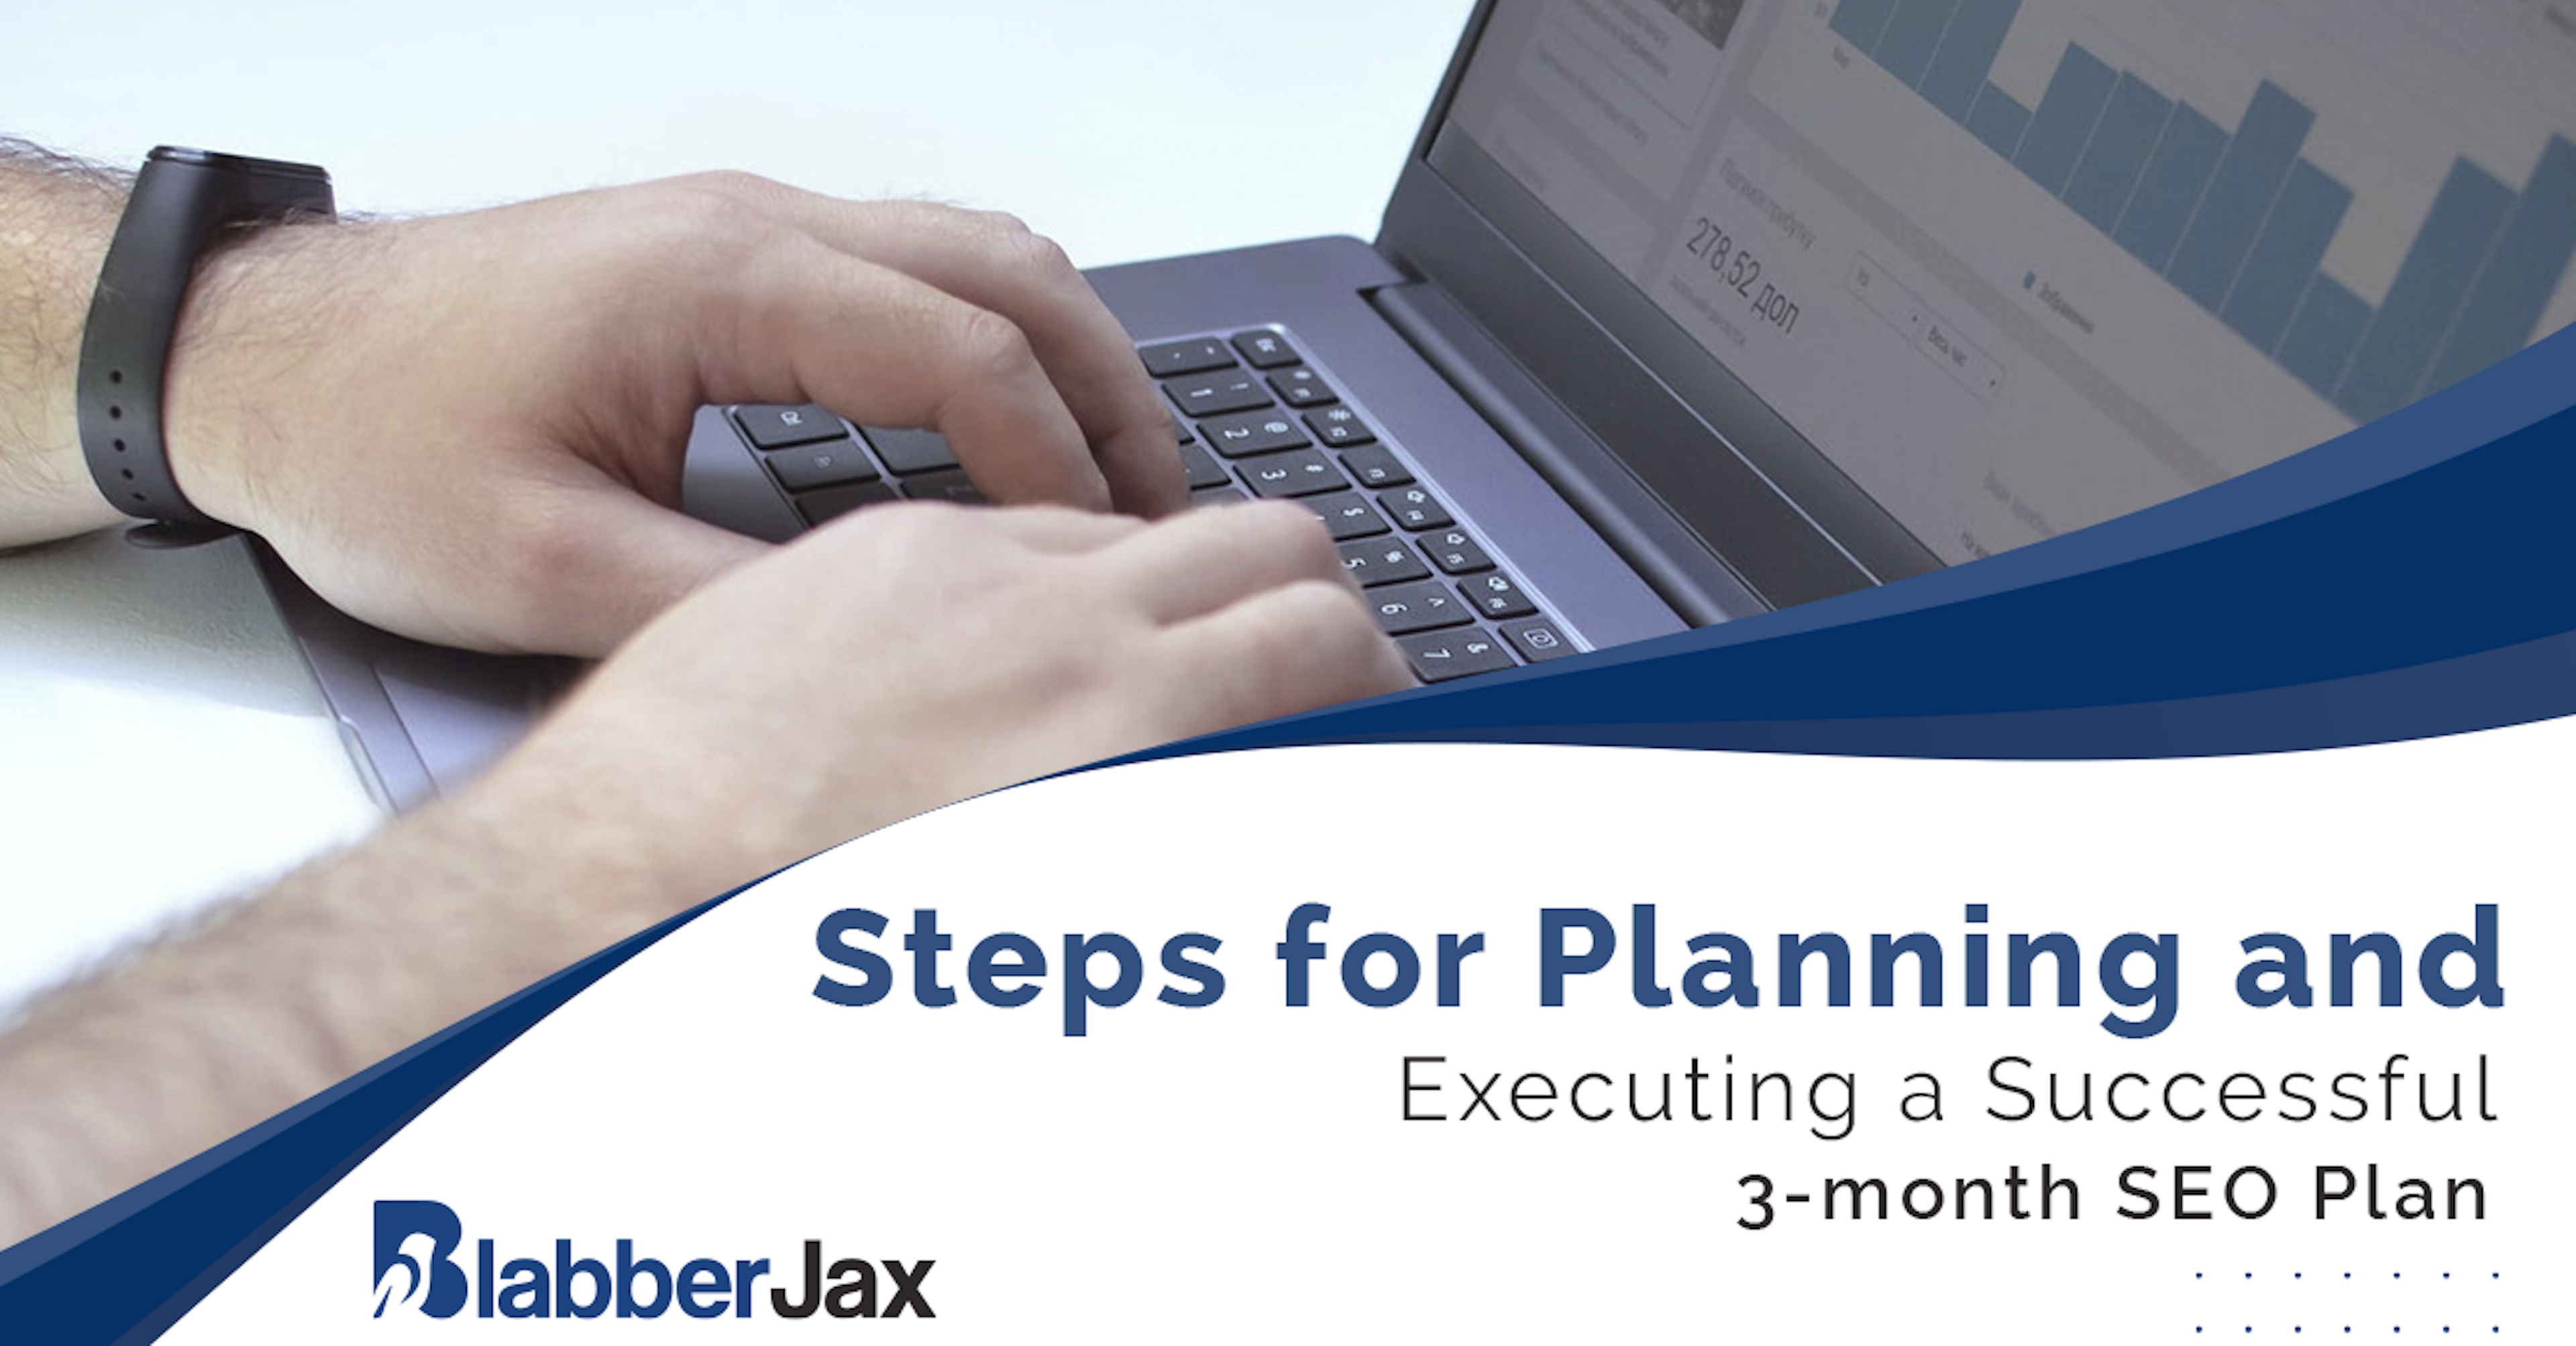 Steps for Planning and Executing a Successful 3-month SEO Plan